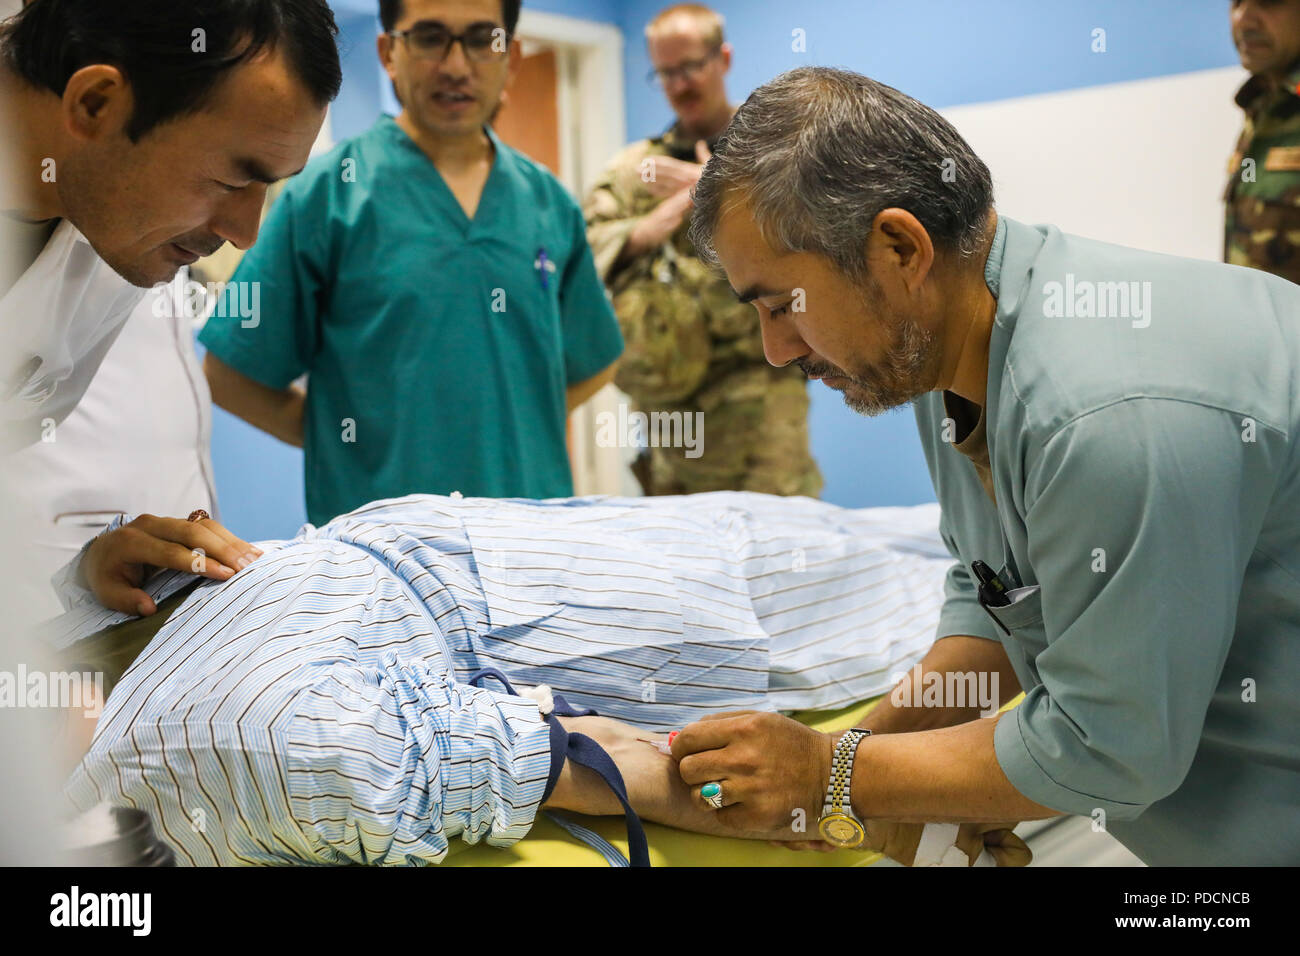 KANDAHAR PROVINCE, Afghanistan (August 5, 2018) -- Afghan radiology technicians prepare a patient for a body scan, August 5, 2018, after receiving advice from U.S. Navy Lt. Cdr. Justin S. Clark, radiology technician for Kandahar Airfield NATO Role III Multinational Medical Unit, during a medical advisory visit at Kandahar Regional Military Hospital, Camp Hero in Kandahar, Afghanistan. Staff members from the Role III conduct routine visits to KRMH to train and advice Afghan medical staff. (U.S. Army photo by Staff Sgt. Neysa Canfield/TAAC-South Public Affairs) Stock Photo